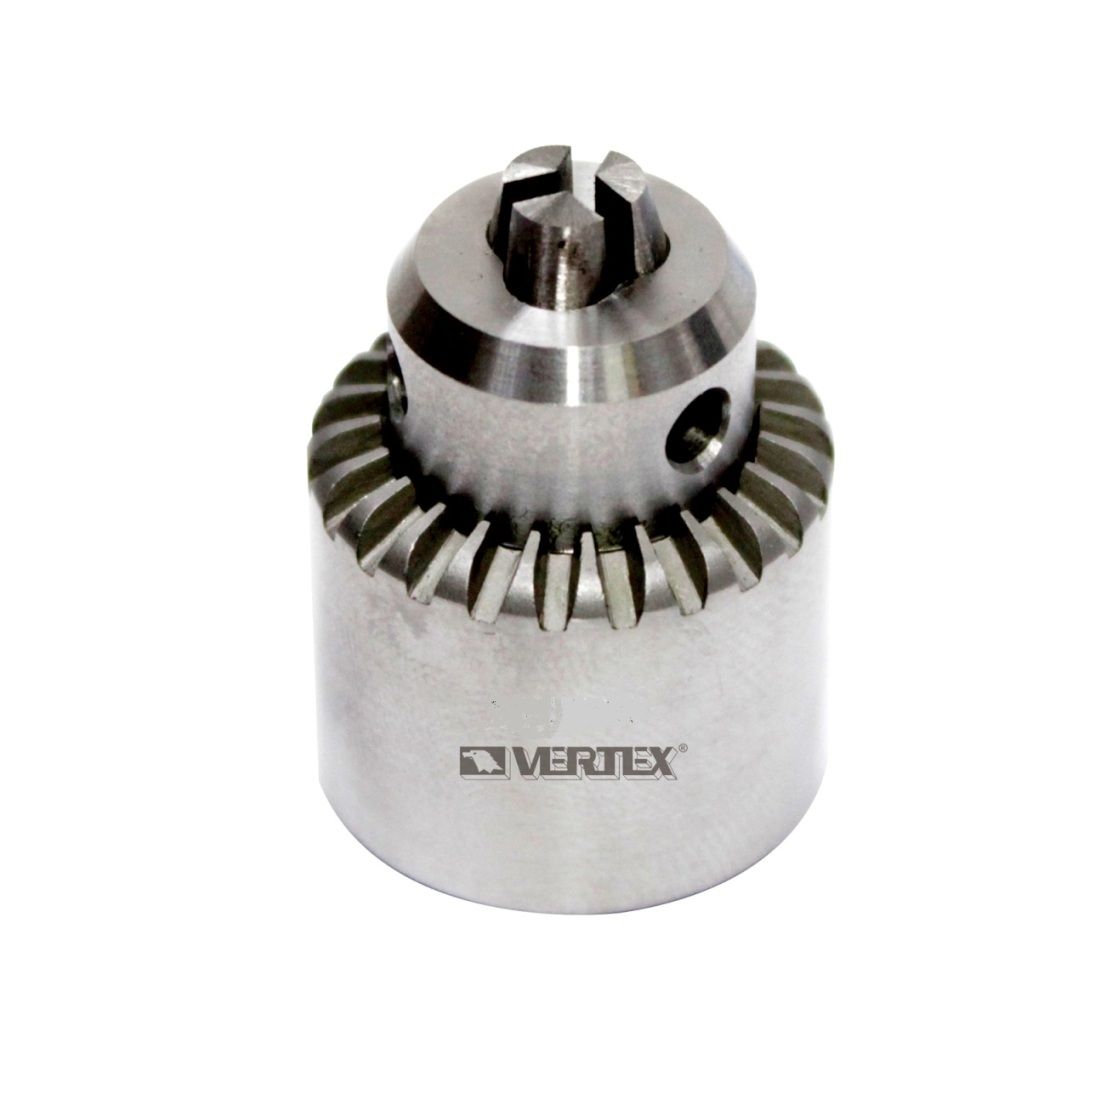 1/64-3/8" JT2 STAINLESS STEEL DRILL CHUCK WITH KEY (3700-0309)